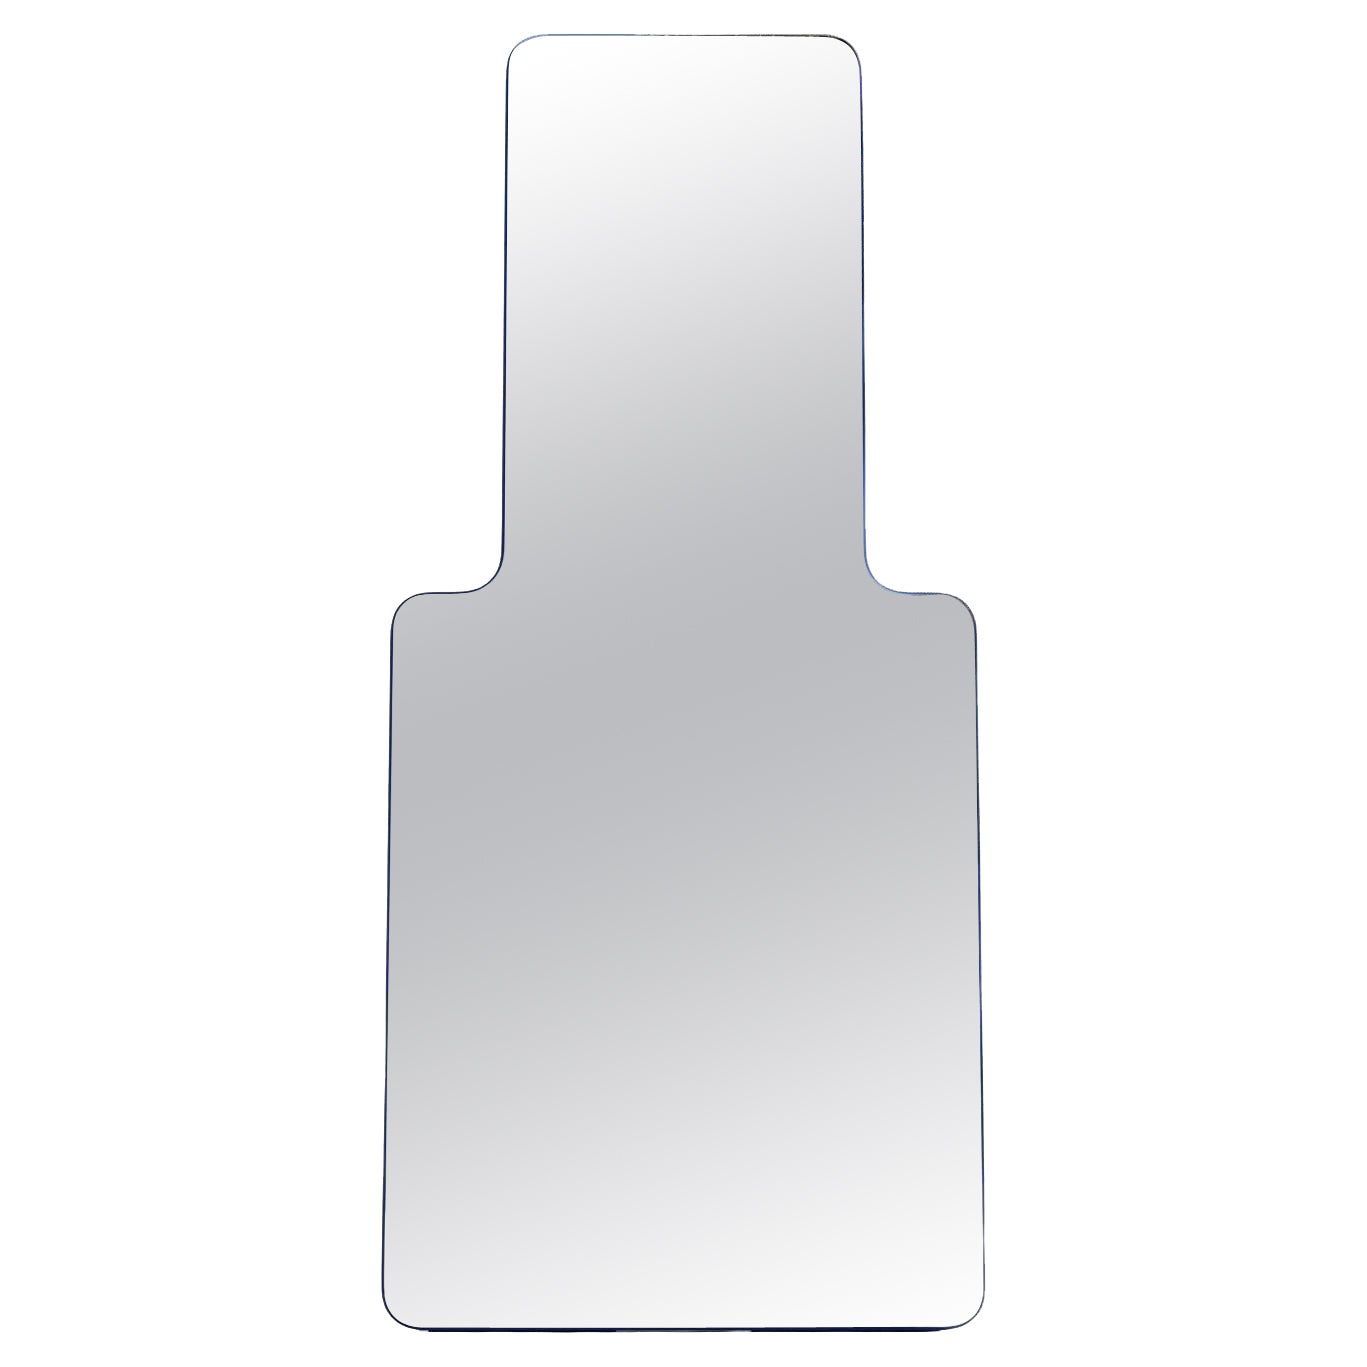 Loveself 03 Mirror by Oito For Sale